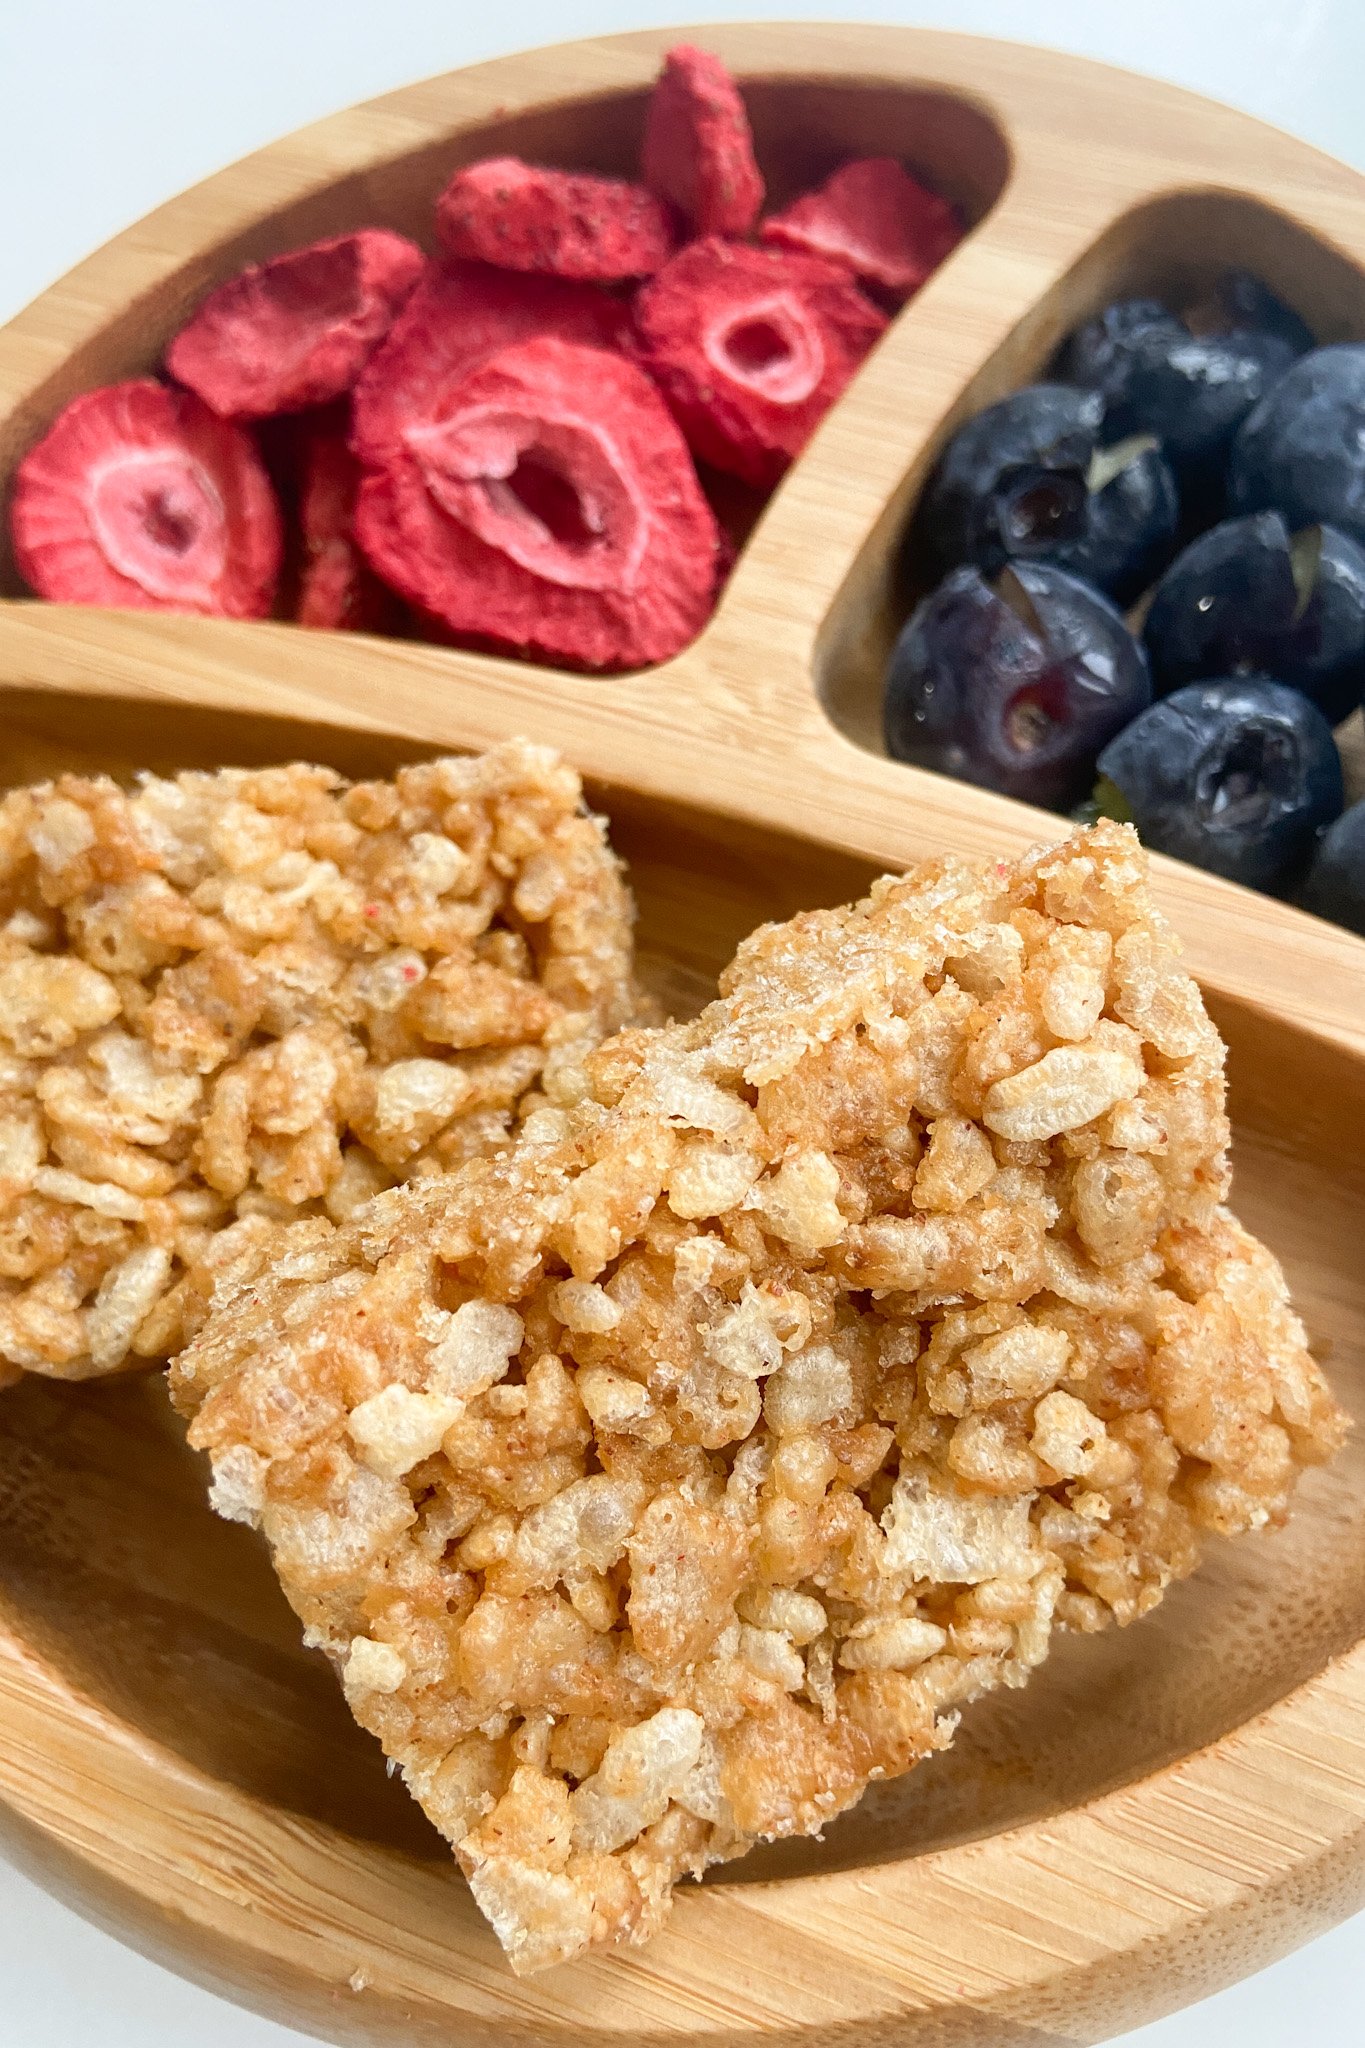 PB rice crispie treats served with freeze dried fruits and blueberries